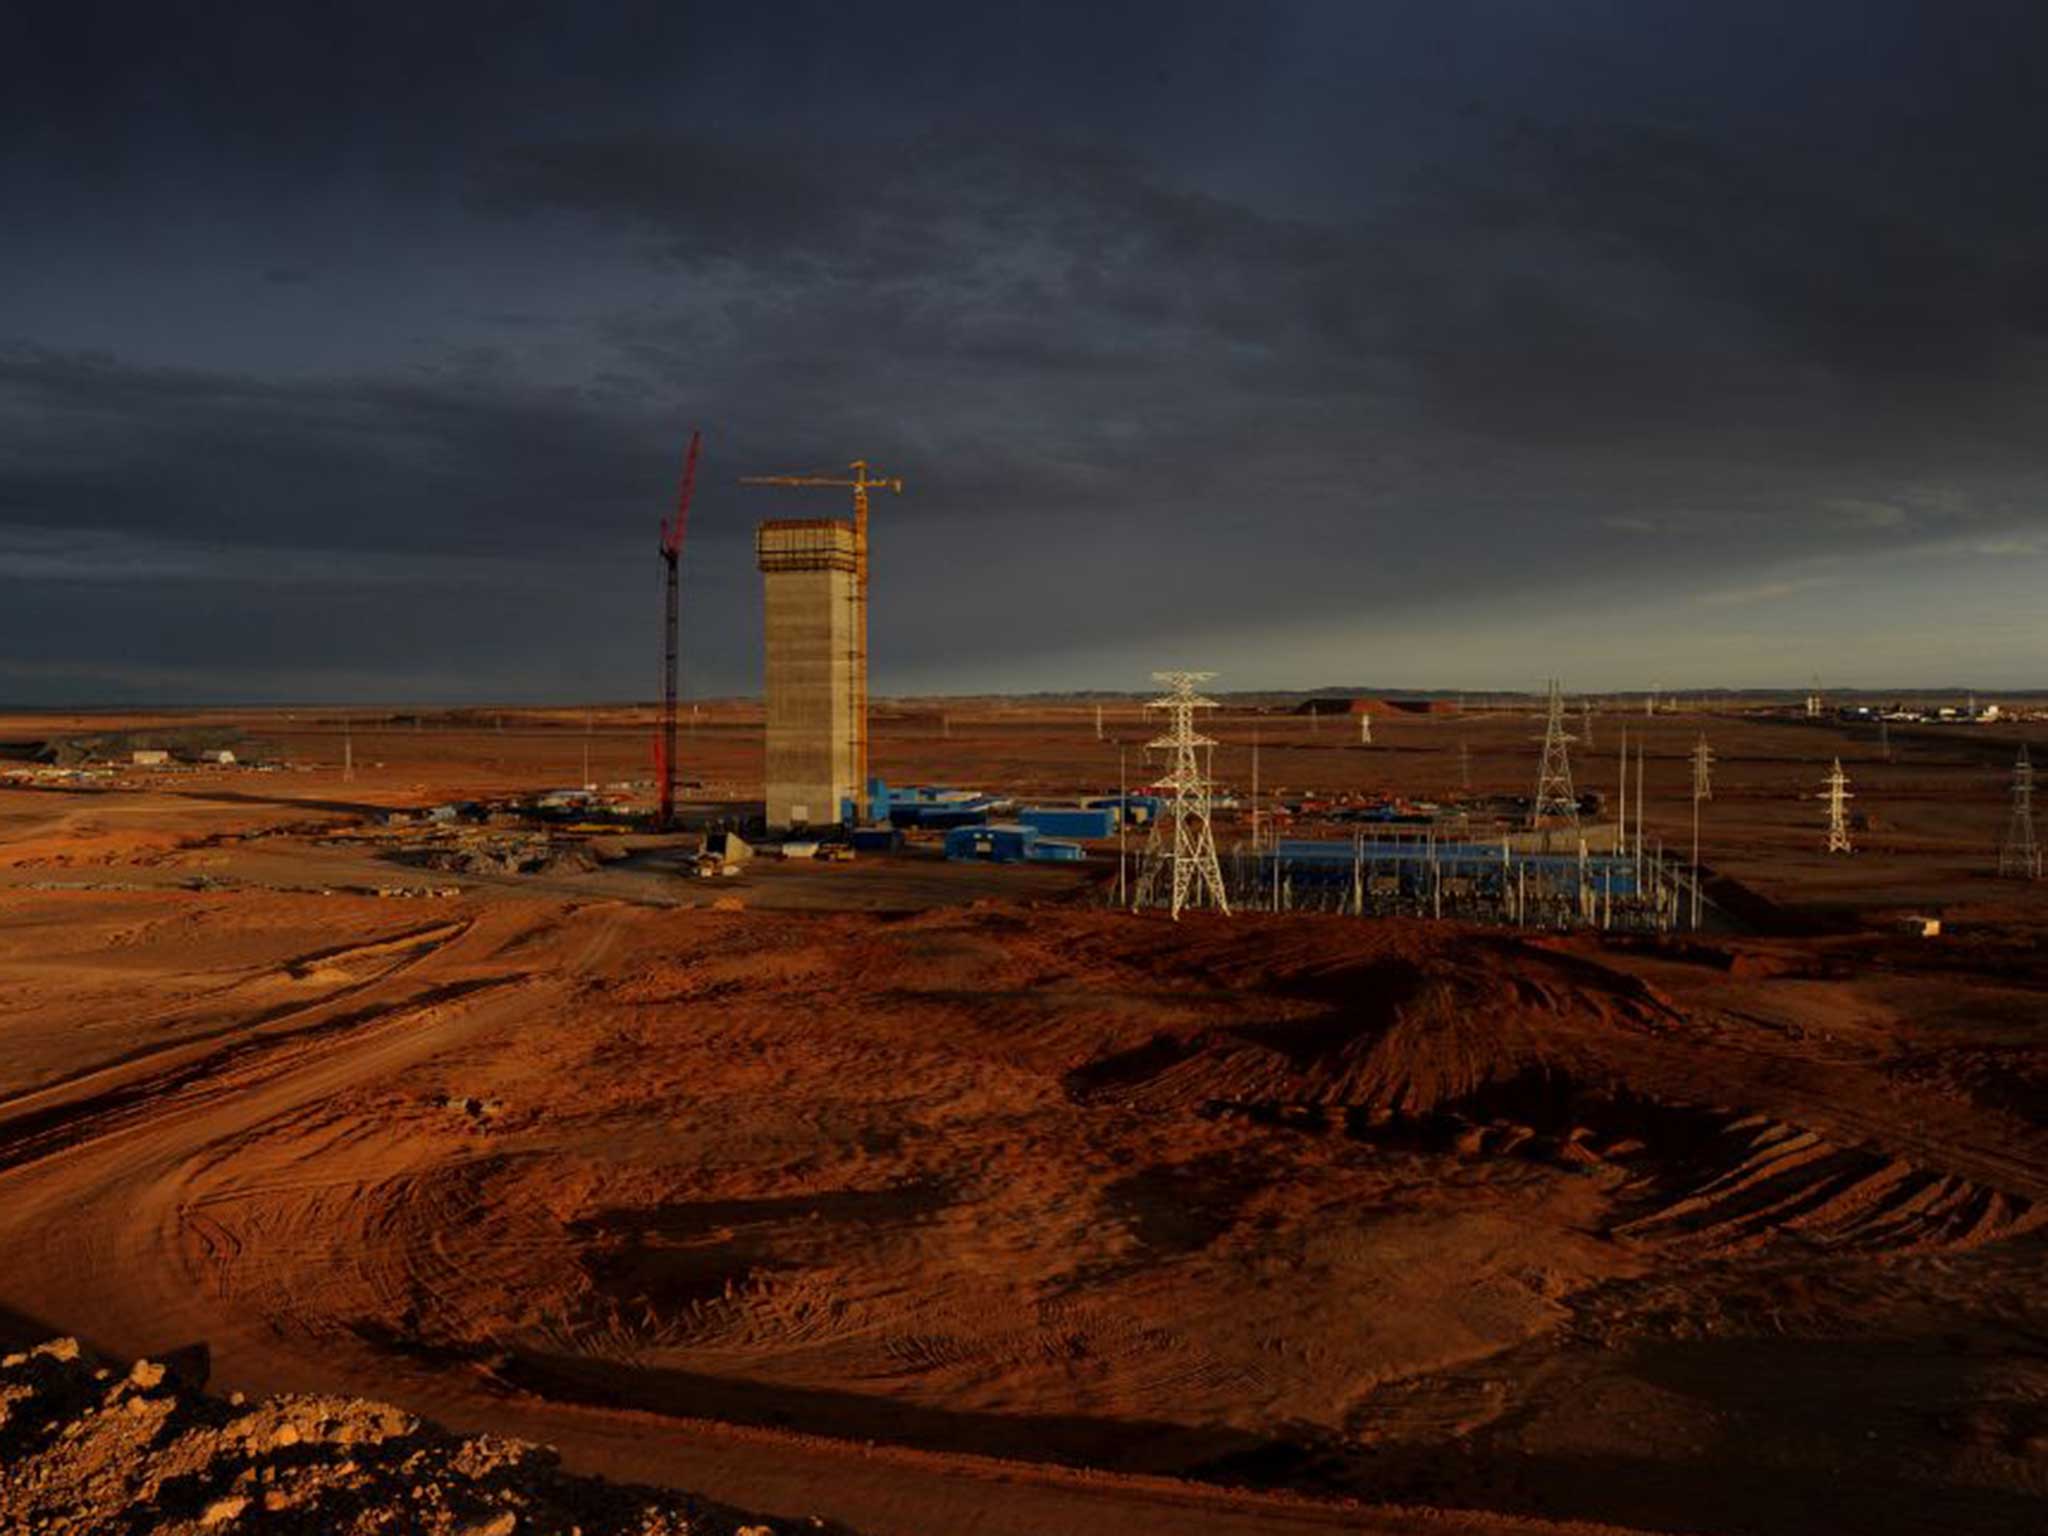 The Rio Tinto operated Oyu Tolgoi gold and copper mine in the Gobi desert, southern Mongolia